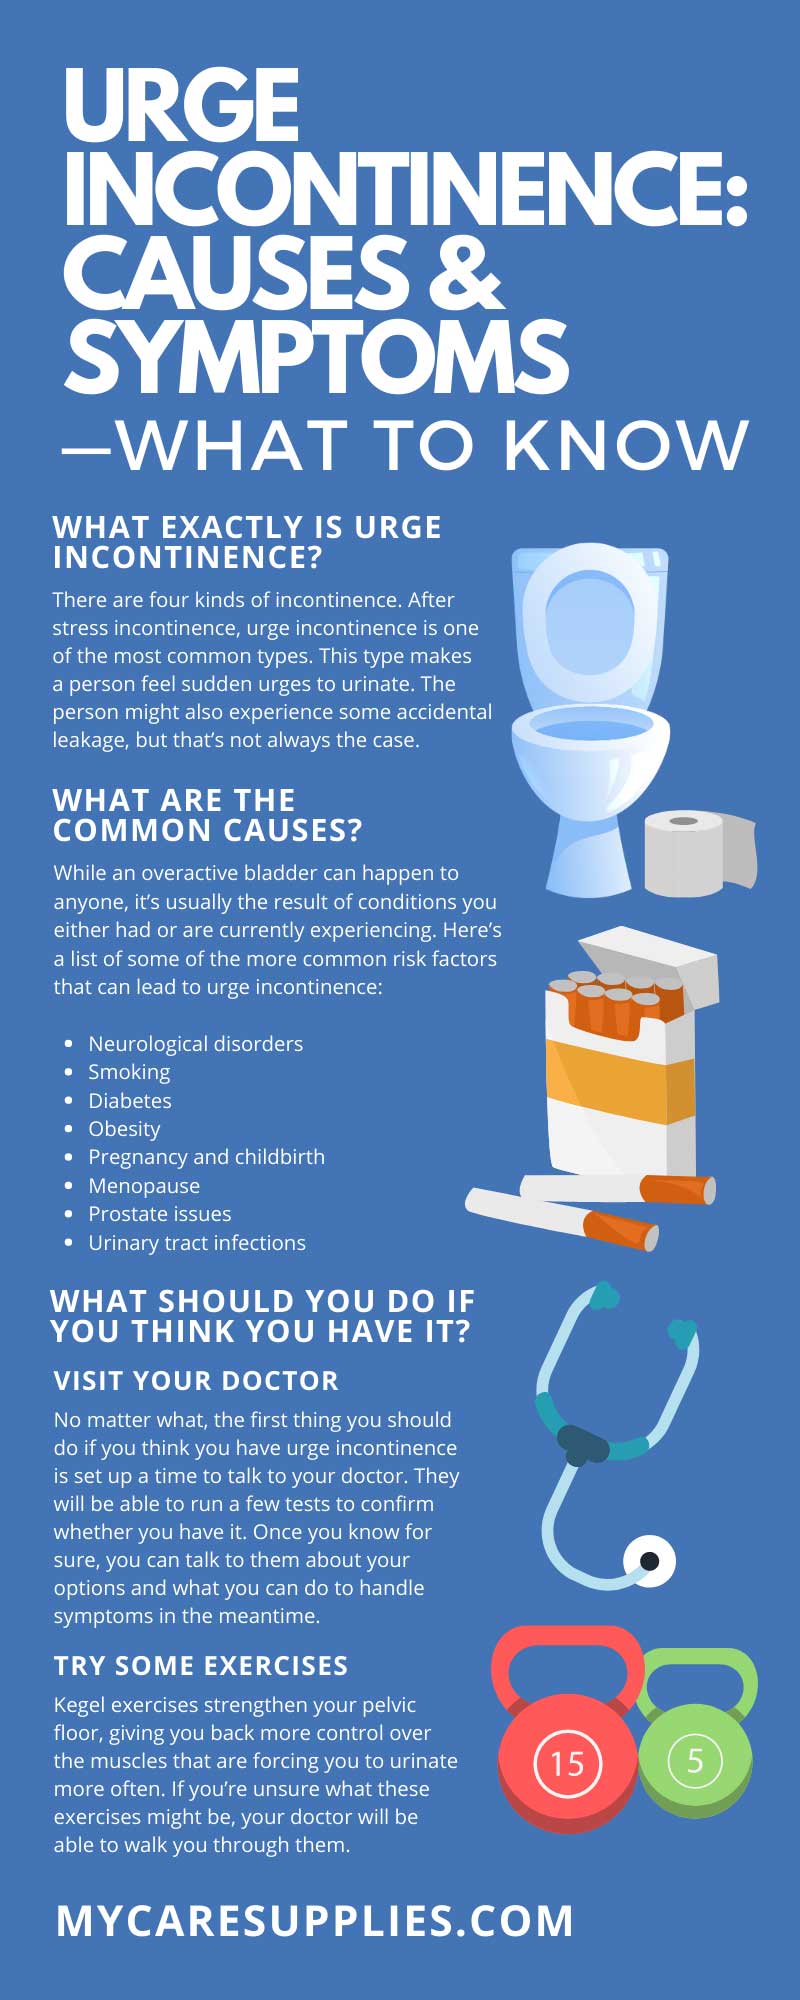 Urge Incontinence: Causes & Symptoms—What To Know